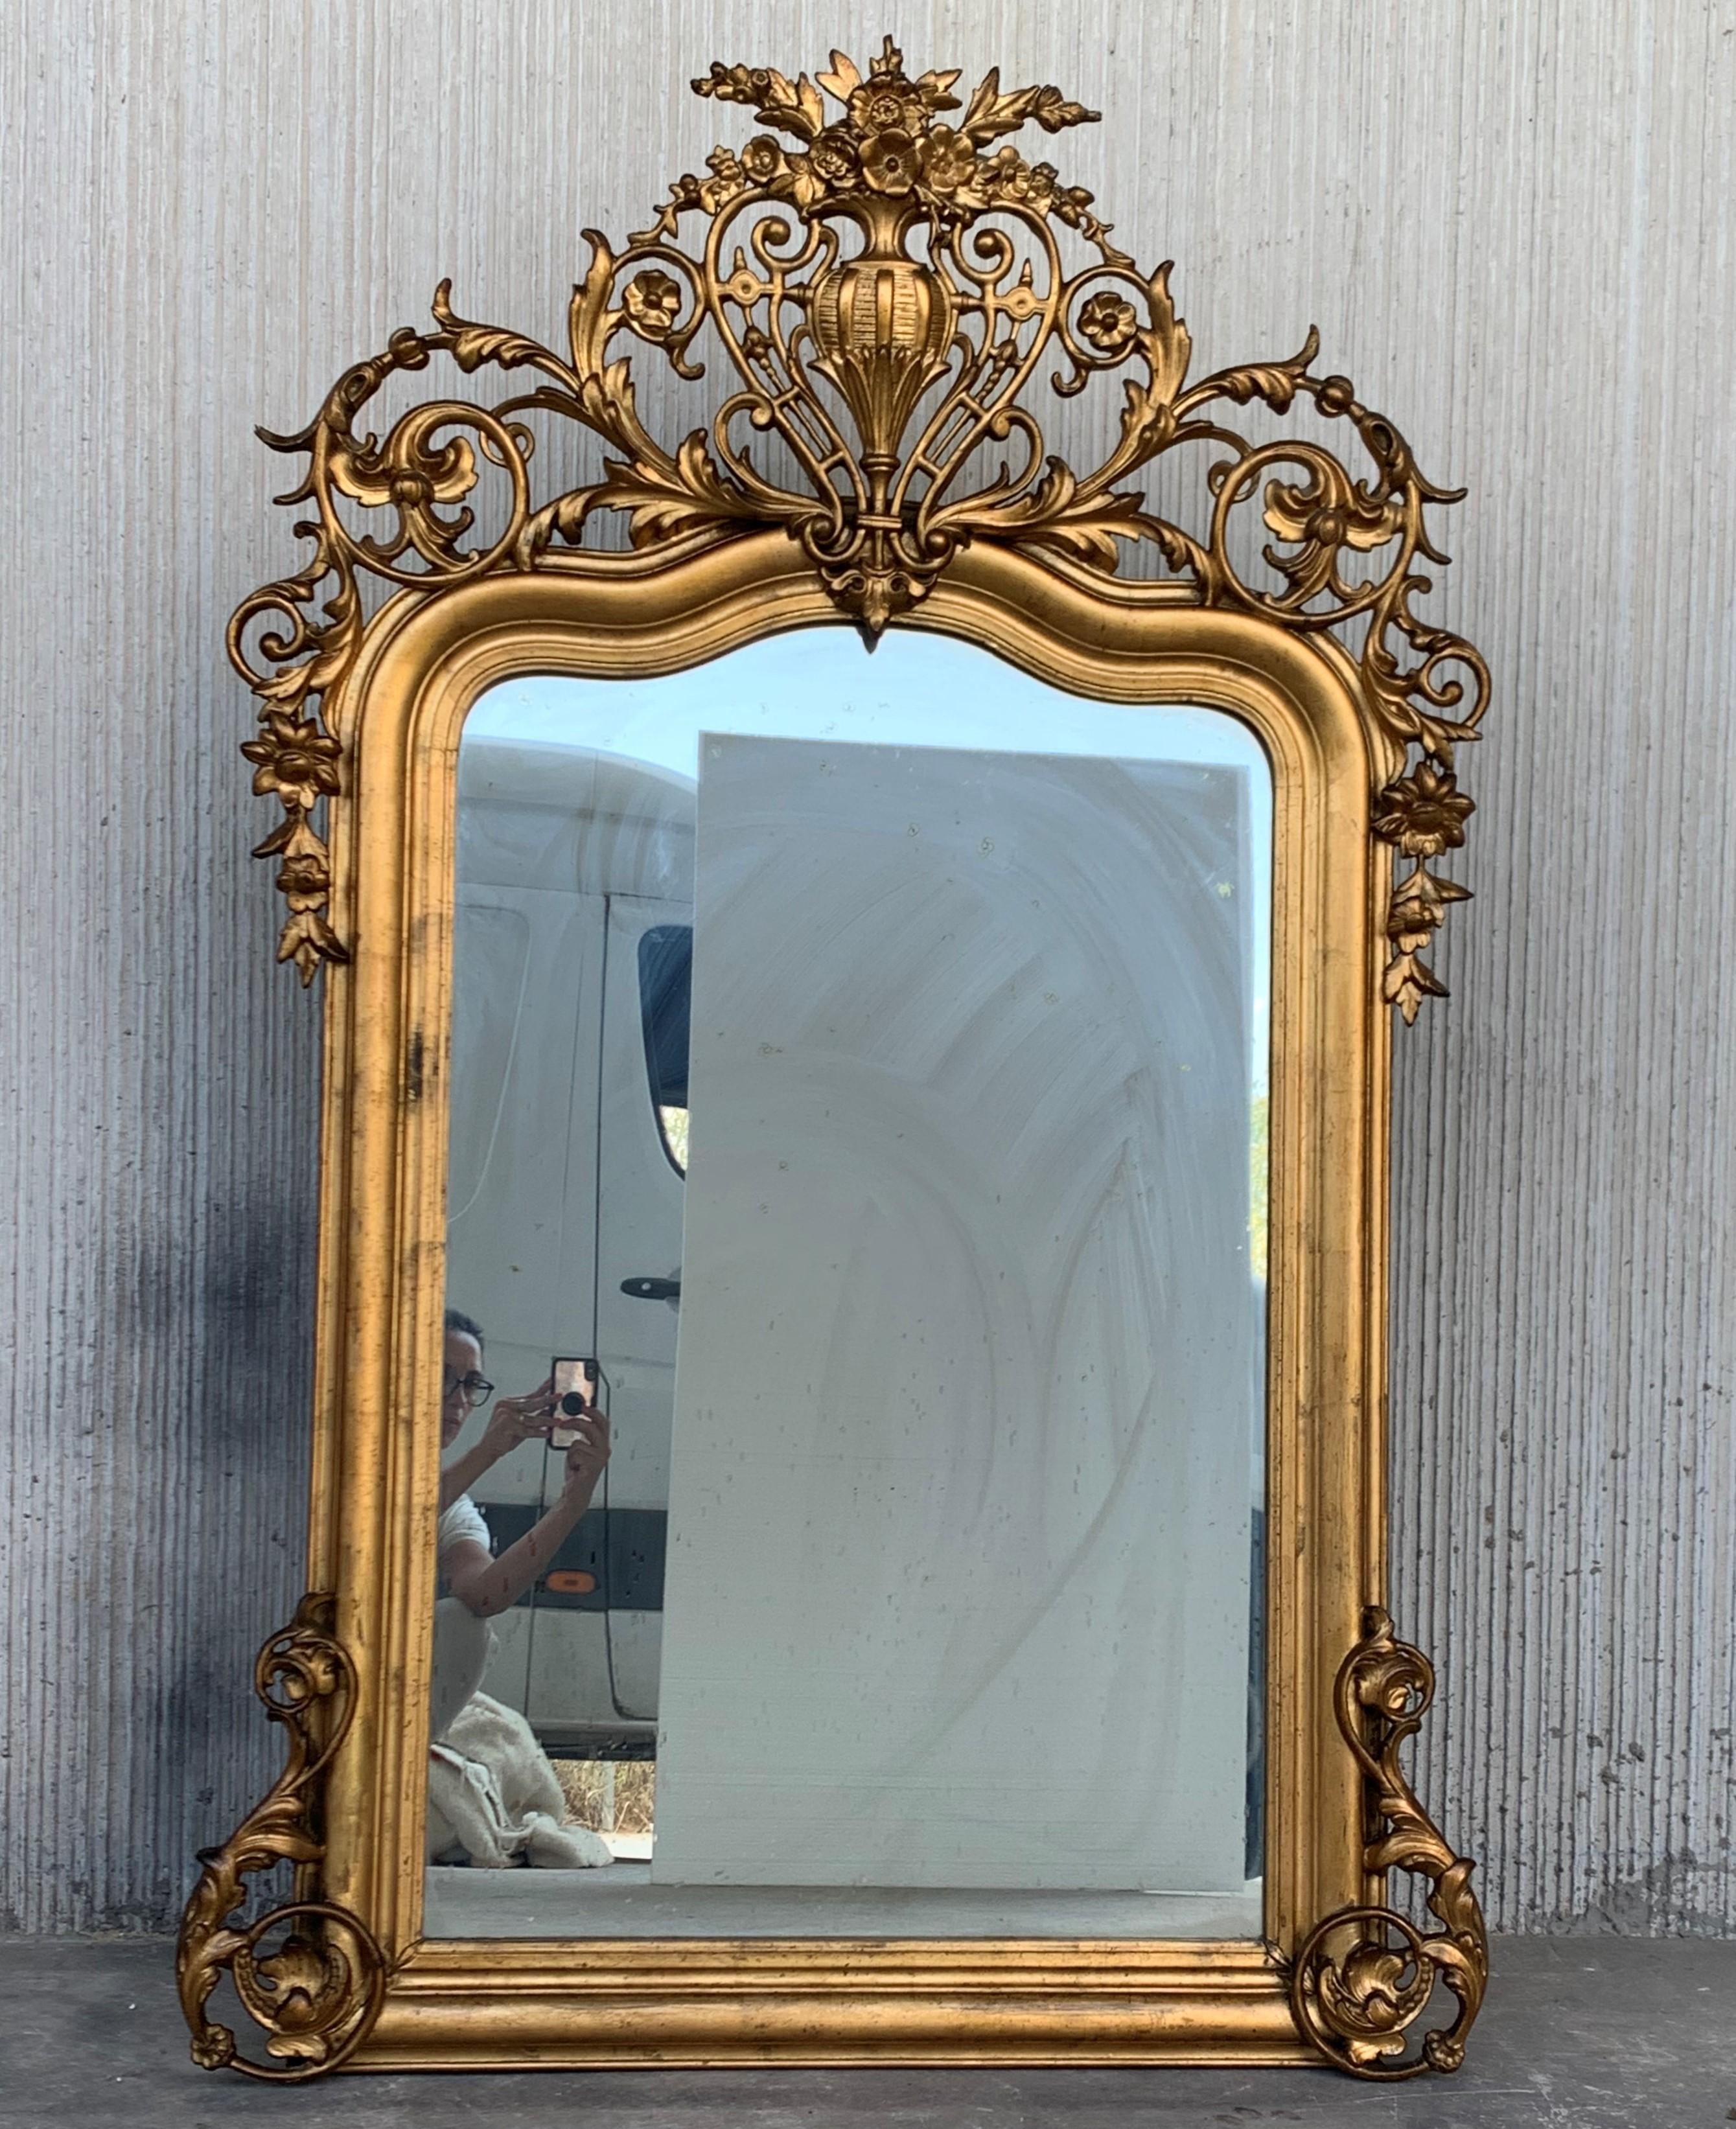 19th century French Empire period carved giltwood rectangular mirror
An exceptional matched hand carved and gilded Italian mirror. Highly carved with flowers, original glass and original wood backs, France, 19th century.